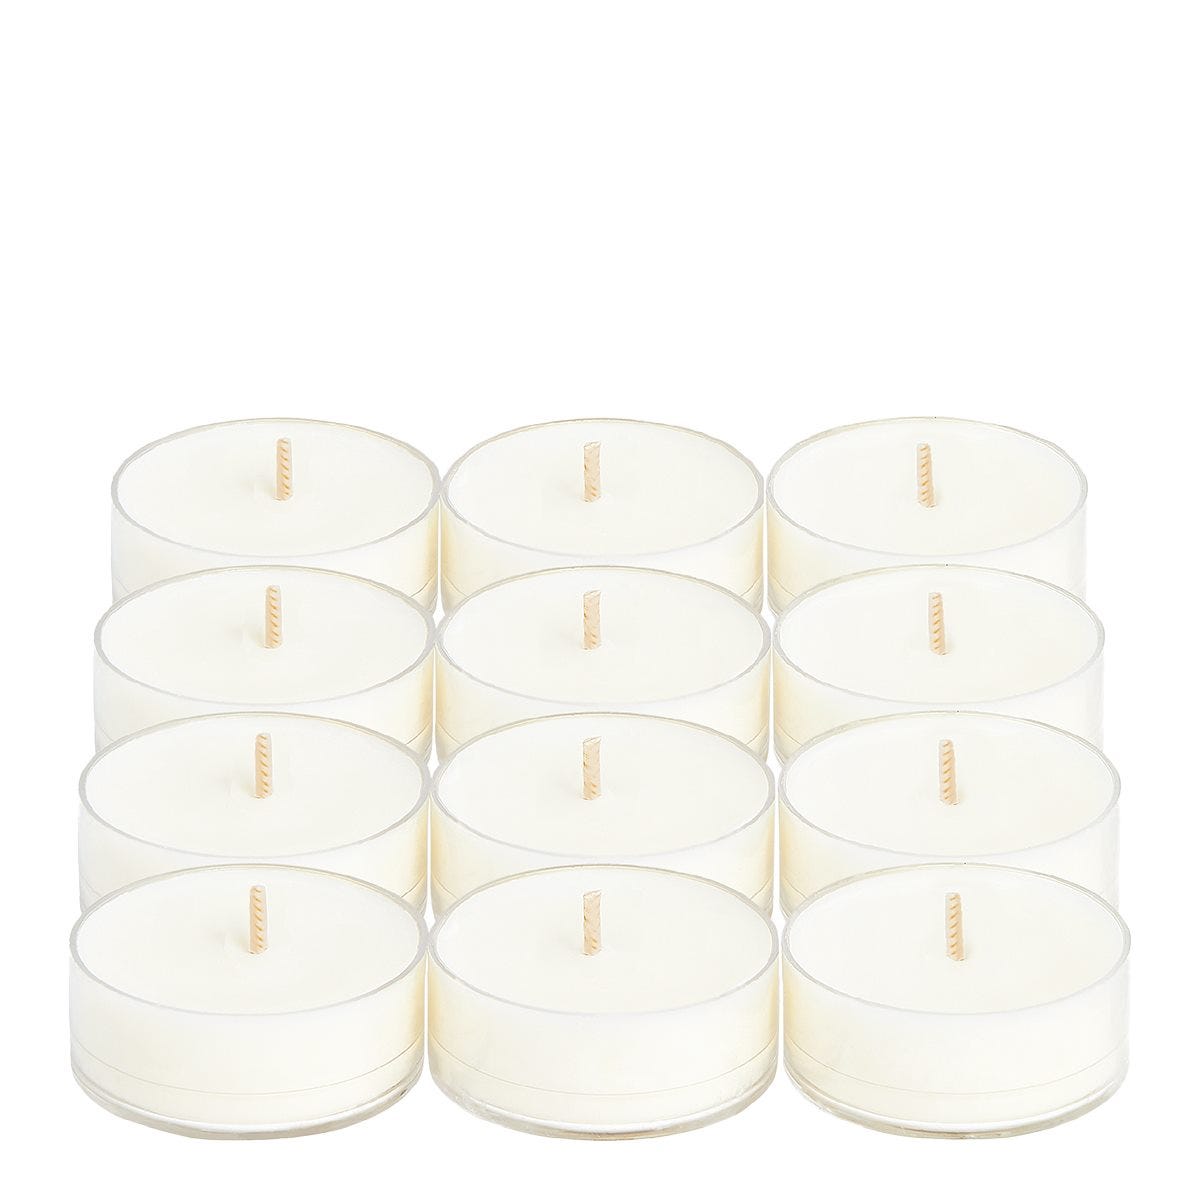 Be Relaxed Lavender + Patchouli 100% Soy Tealight Candles - PartyLite US